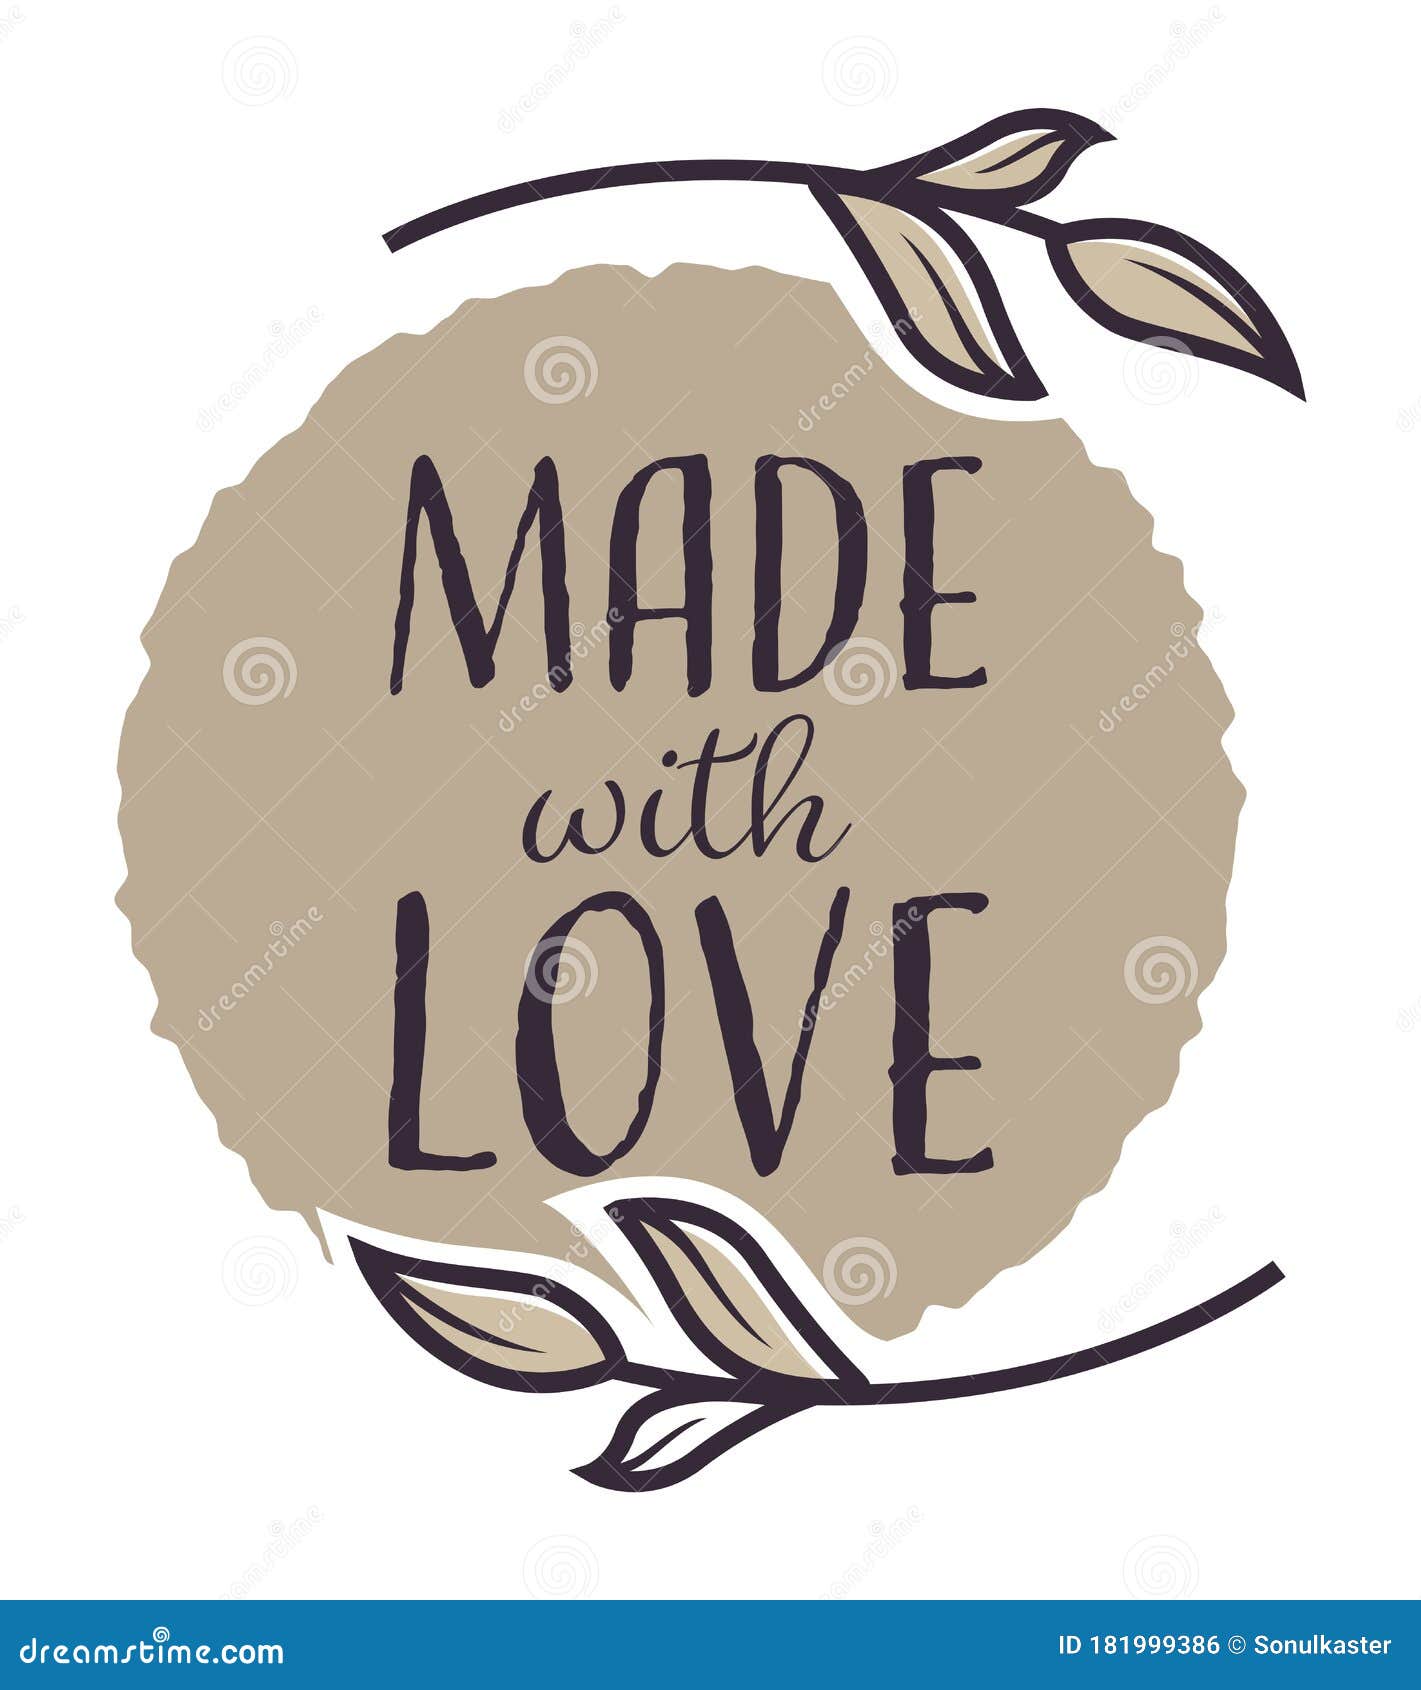 made with love, handmade production emblem or banner